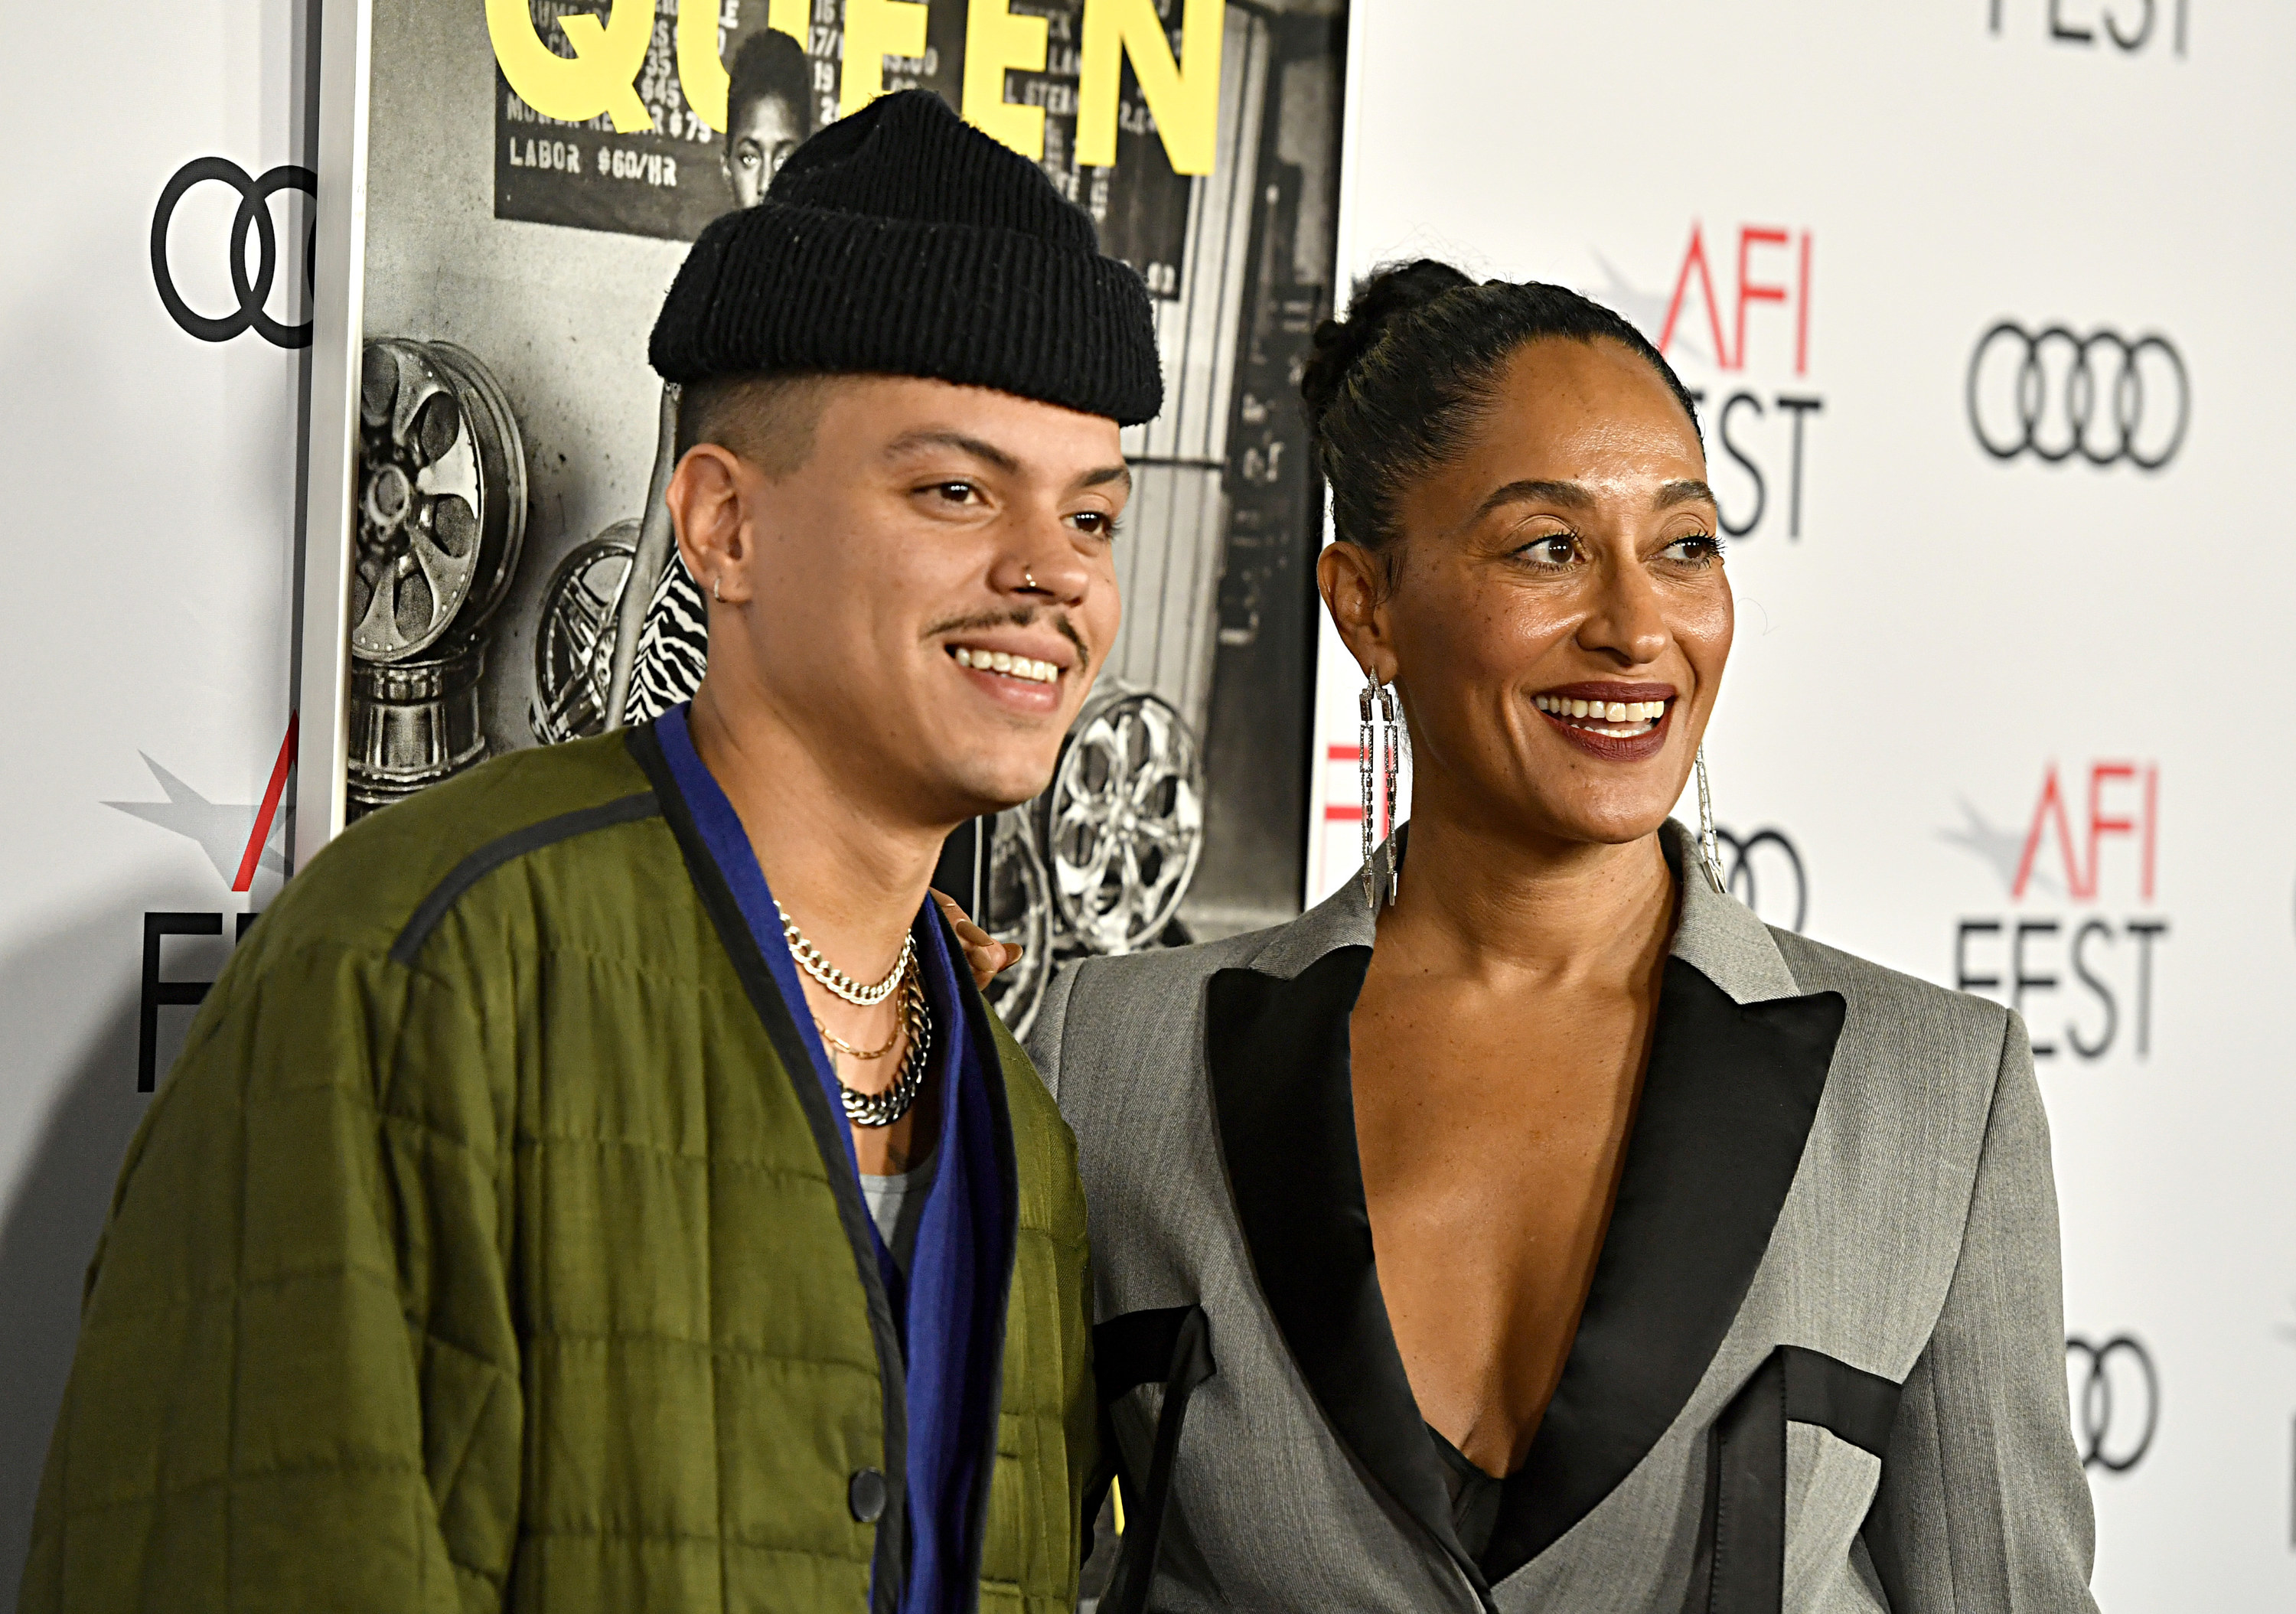 Evan and Tracee posing together for a photo at an event